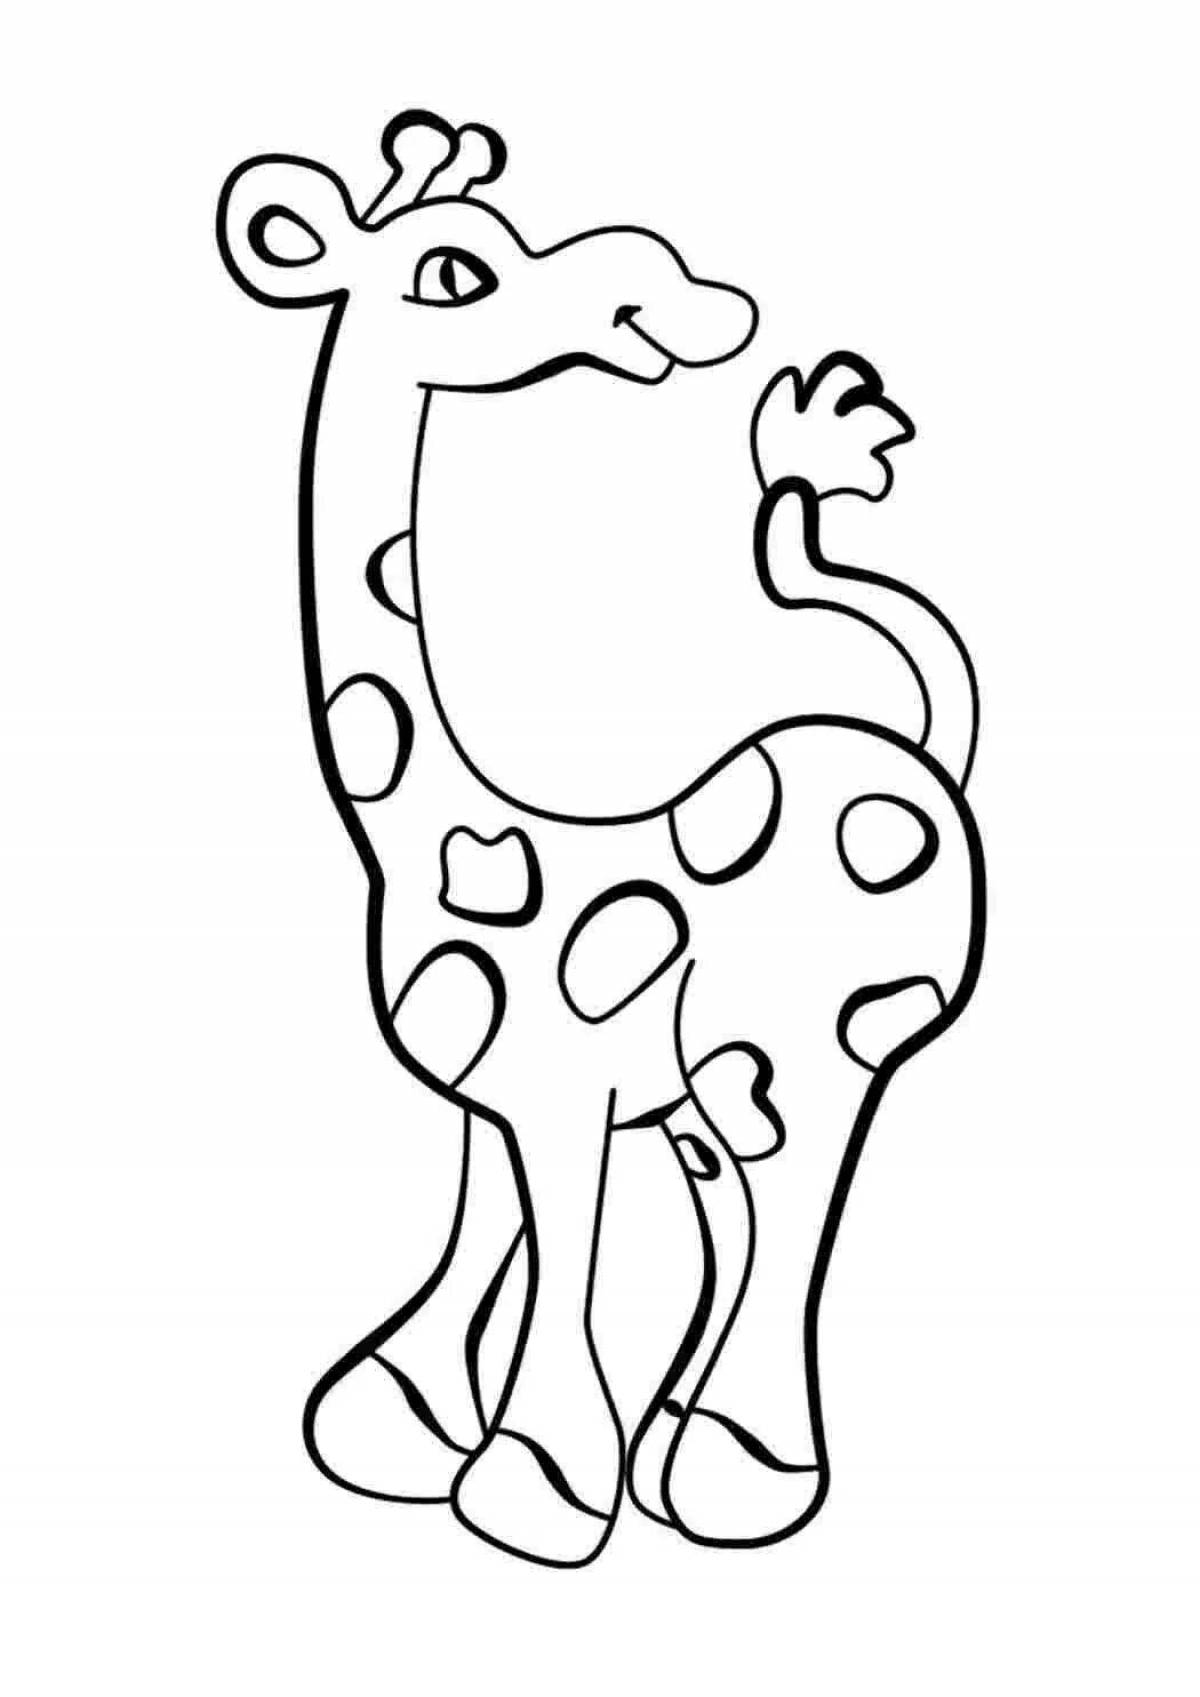 Colorful African animals coloring pages for kids